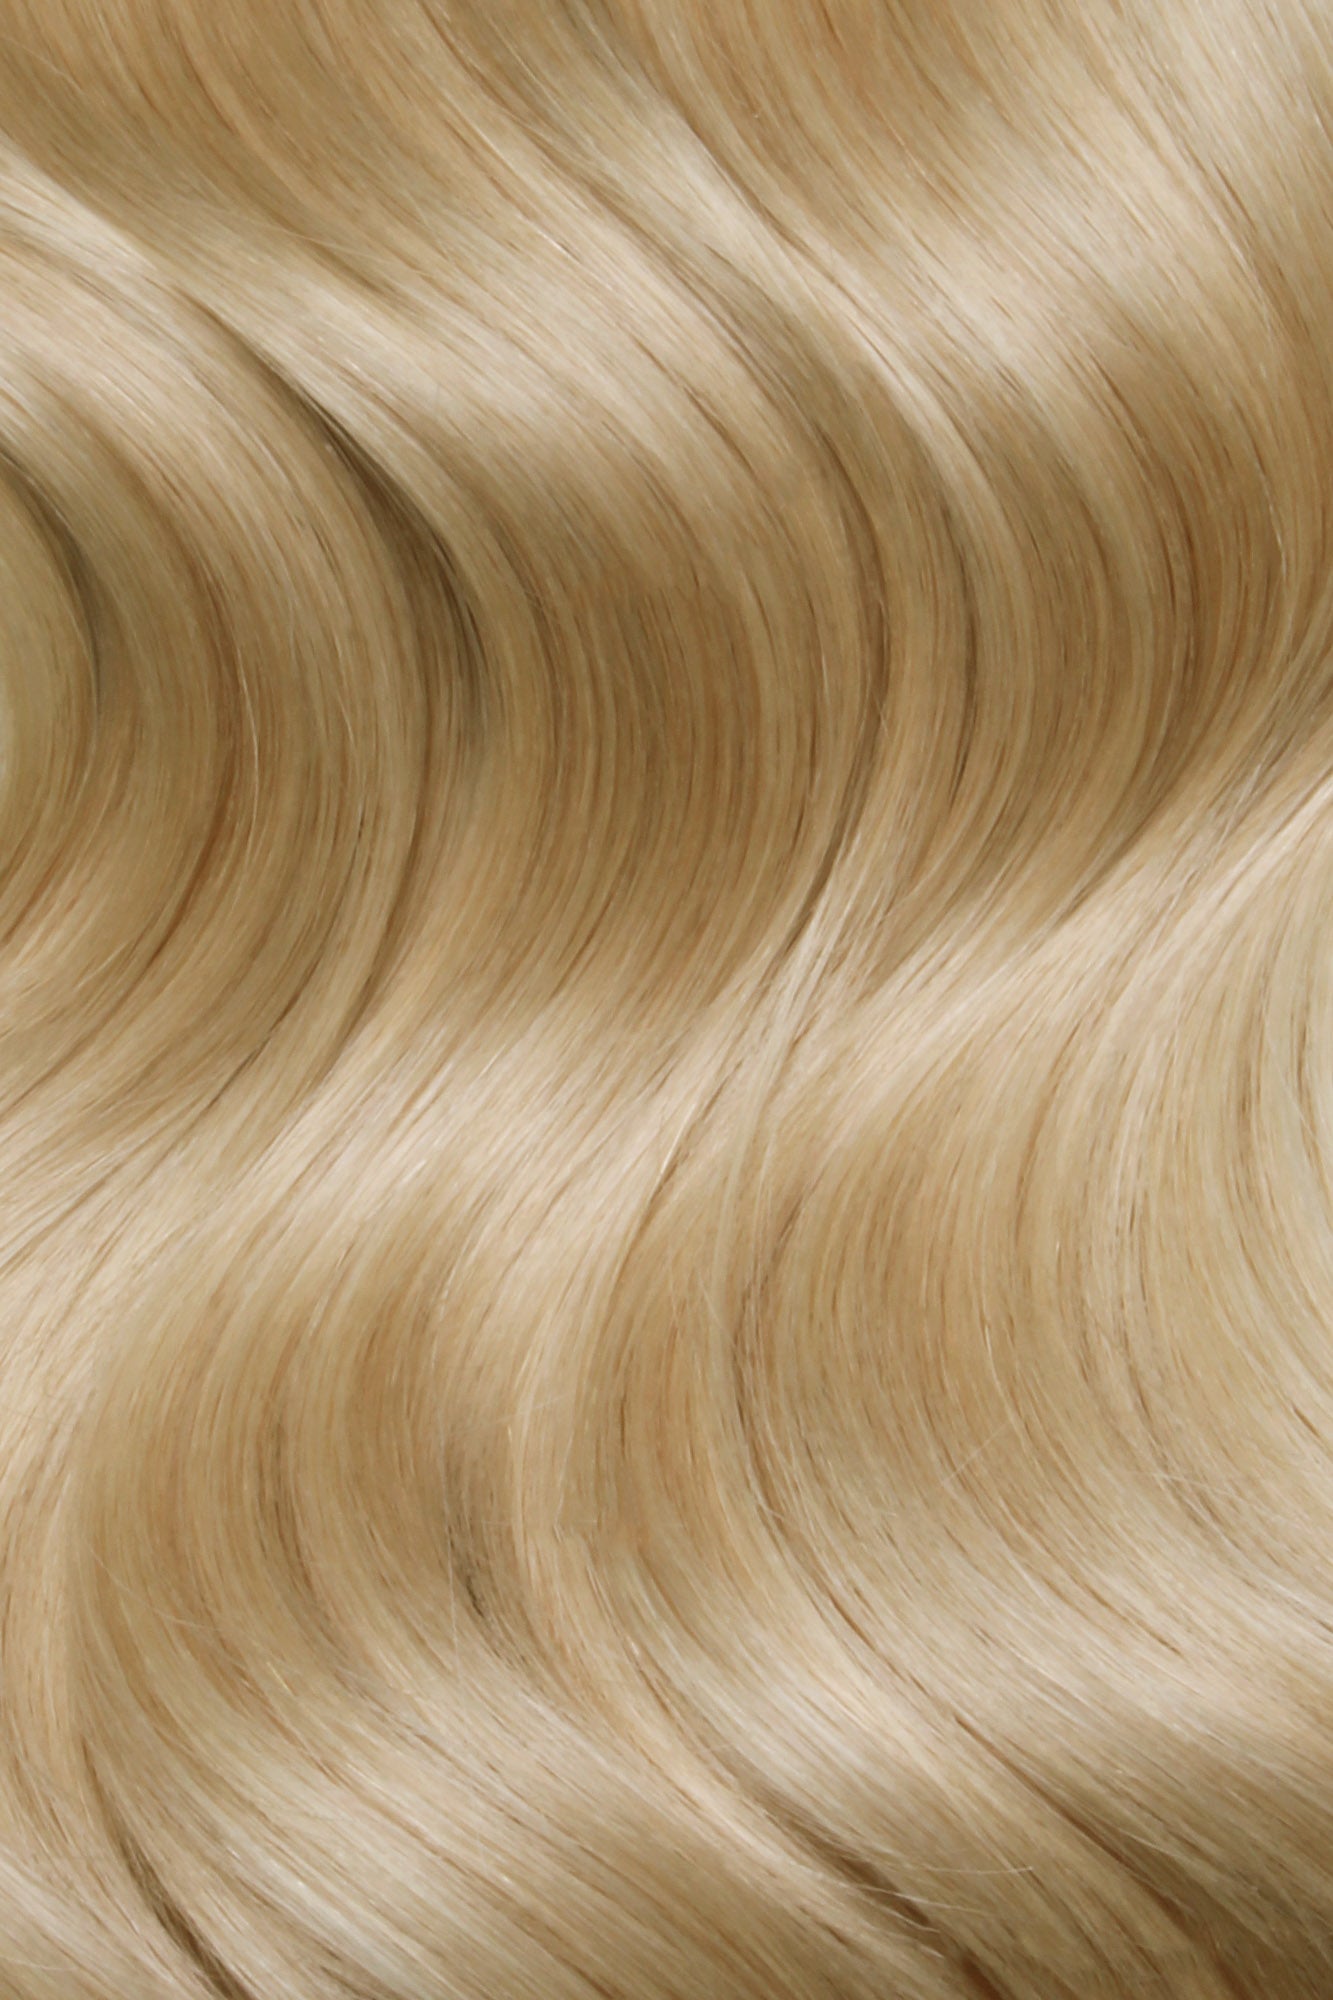 SEAMLESS® Flat Weft 16 Inches - SWAY Hair Extensions Natural-Ash-Blonde-20 Natural SEAMLESS® Flat Weft 16 Inches extensions. Thin, flexible, and discreet. 100% Double Drawn Remy Human Hair. Versatile and reusable